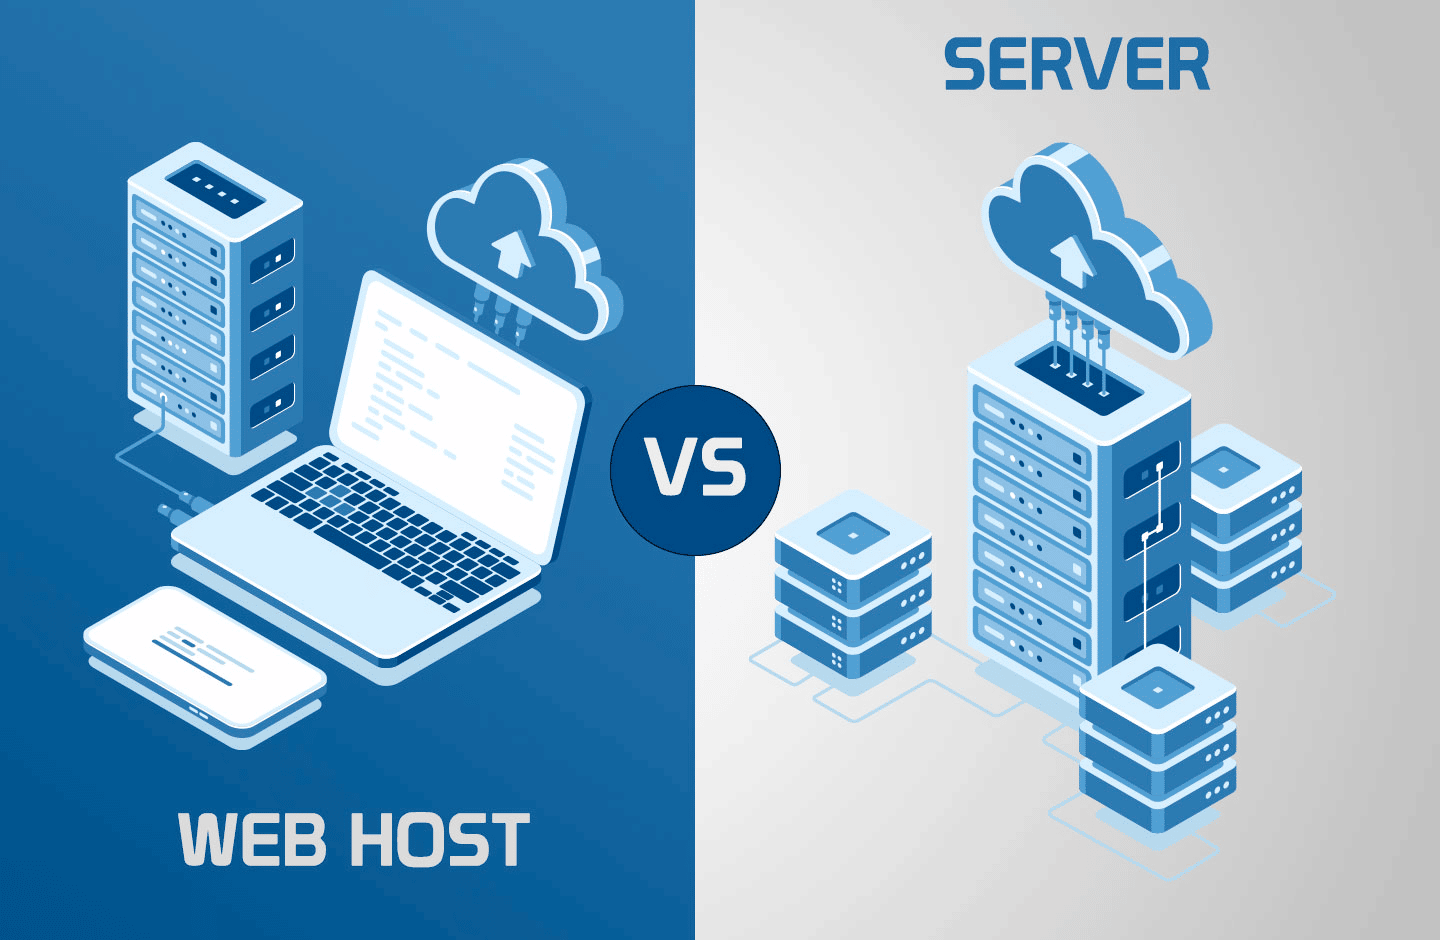 Hosting vs Server: What Are the Key Differences?